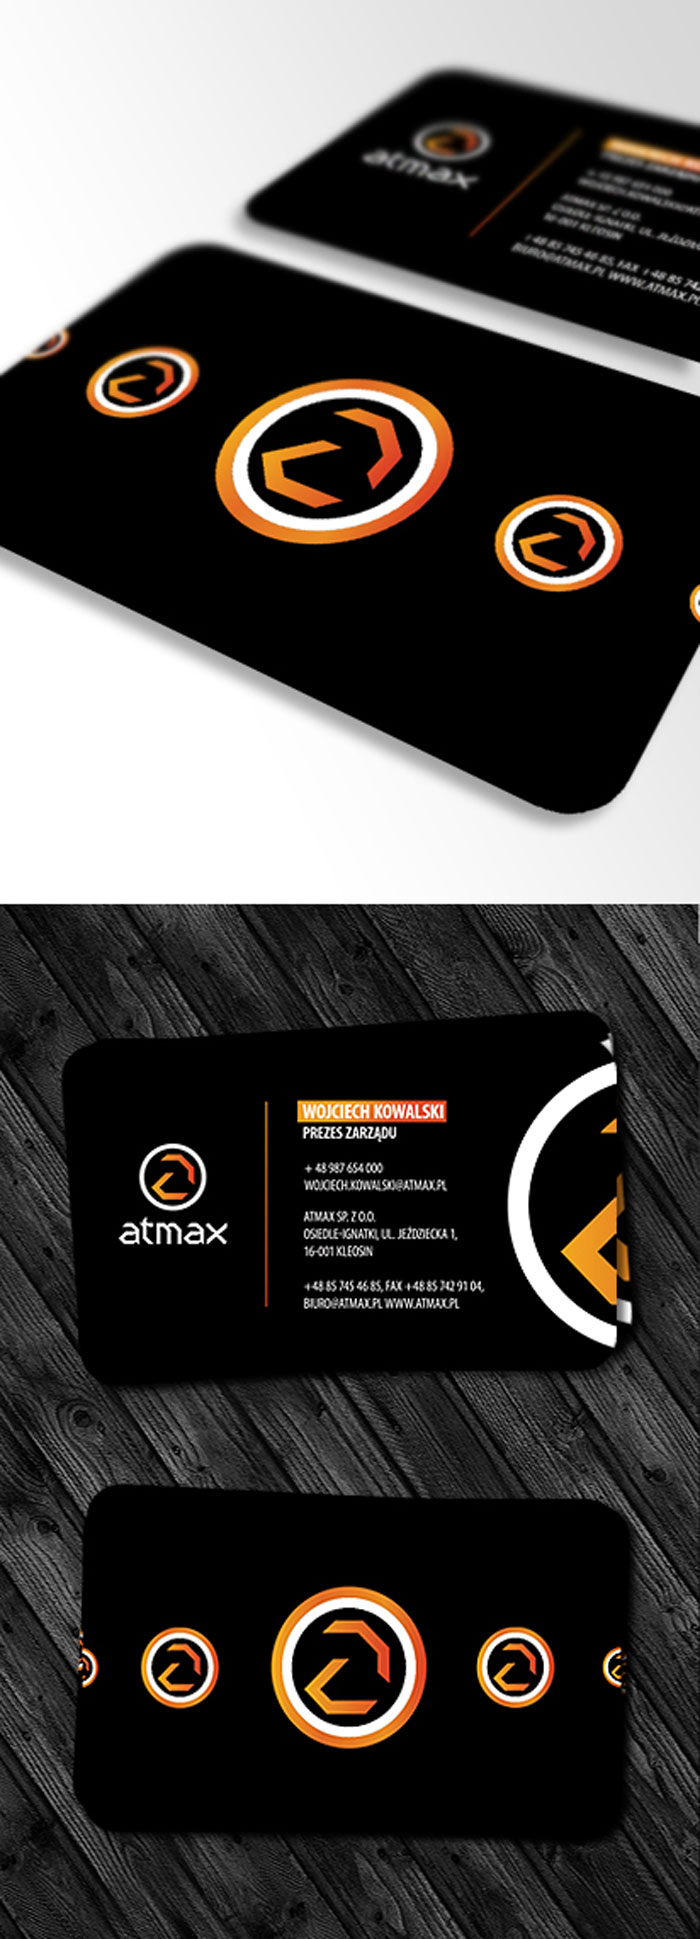 Atmax business card Black Business Card